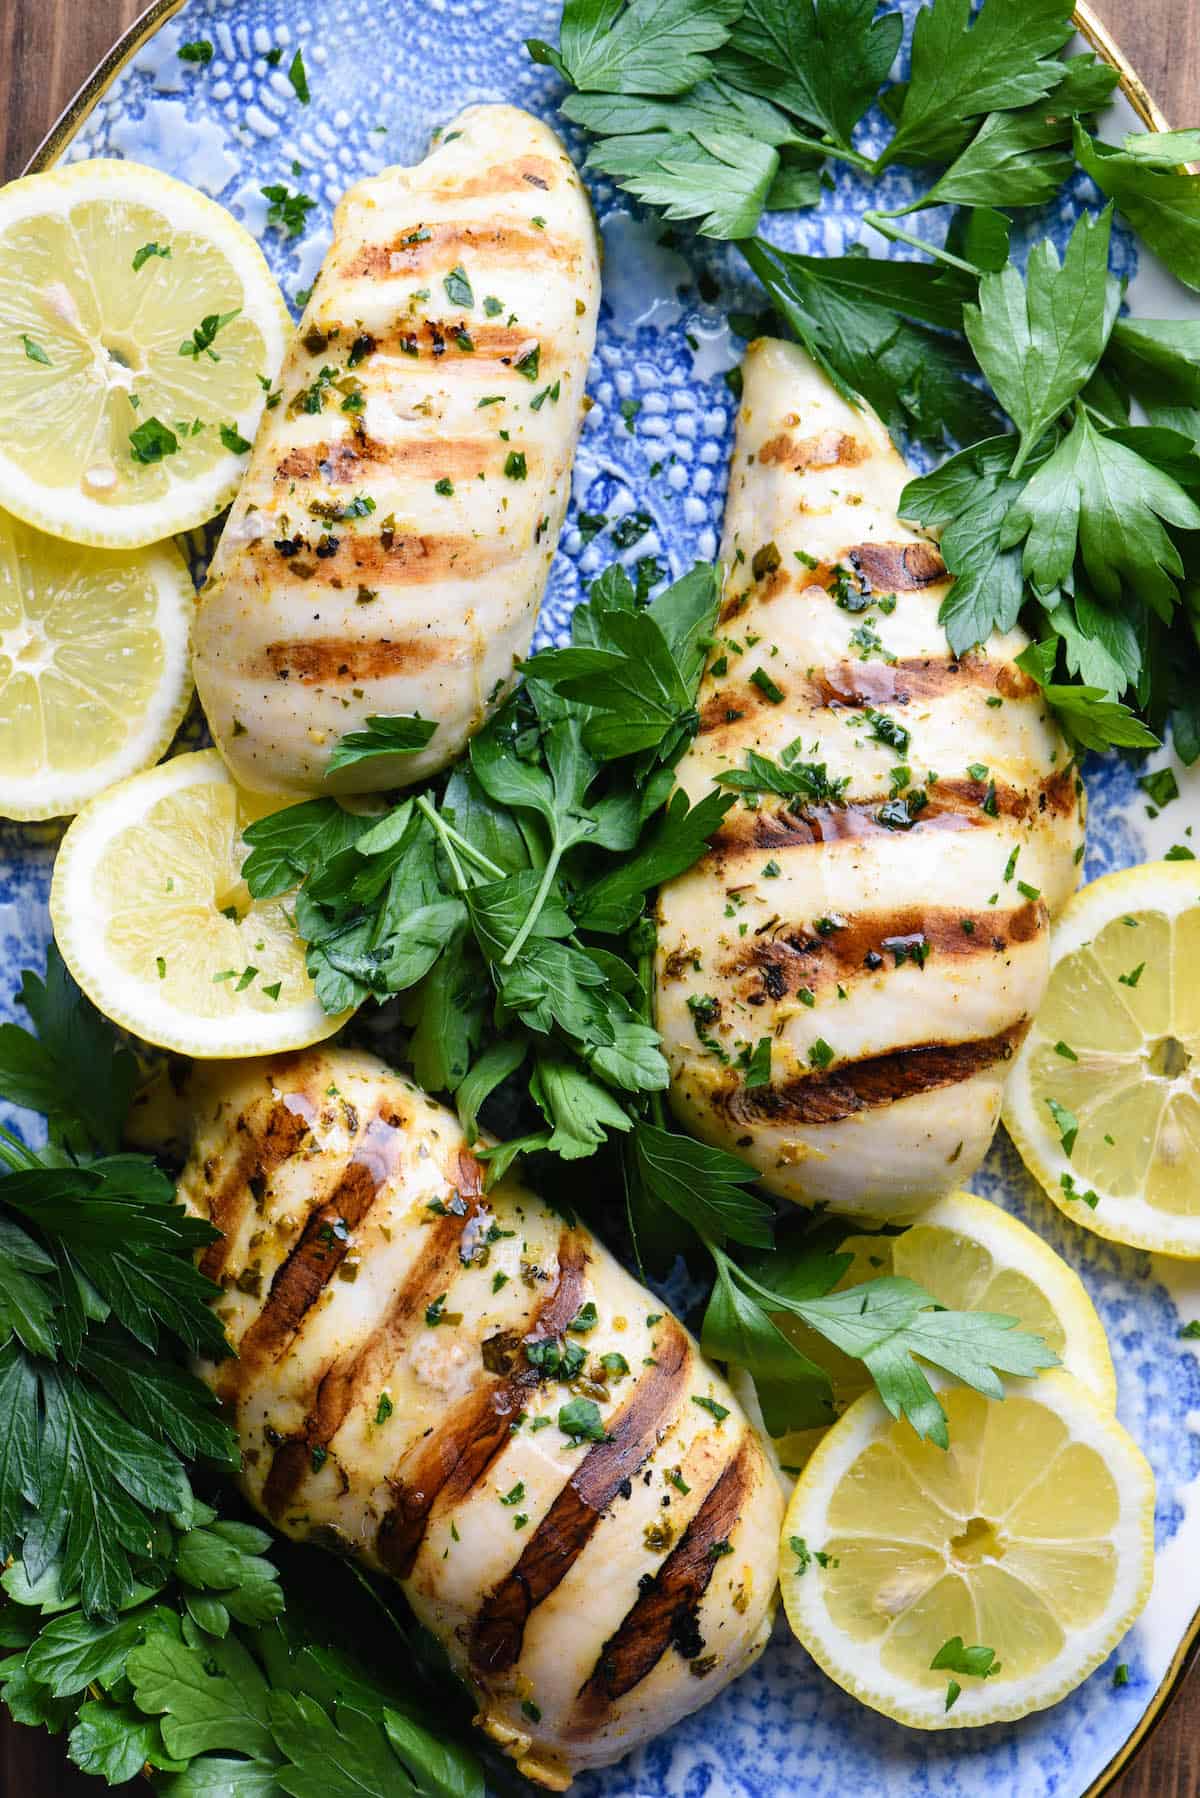 Cooked chicken pieces on pretty blue platter with herbs and lemons slices.